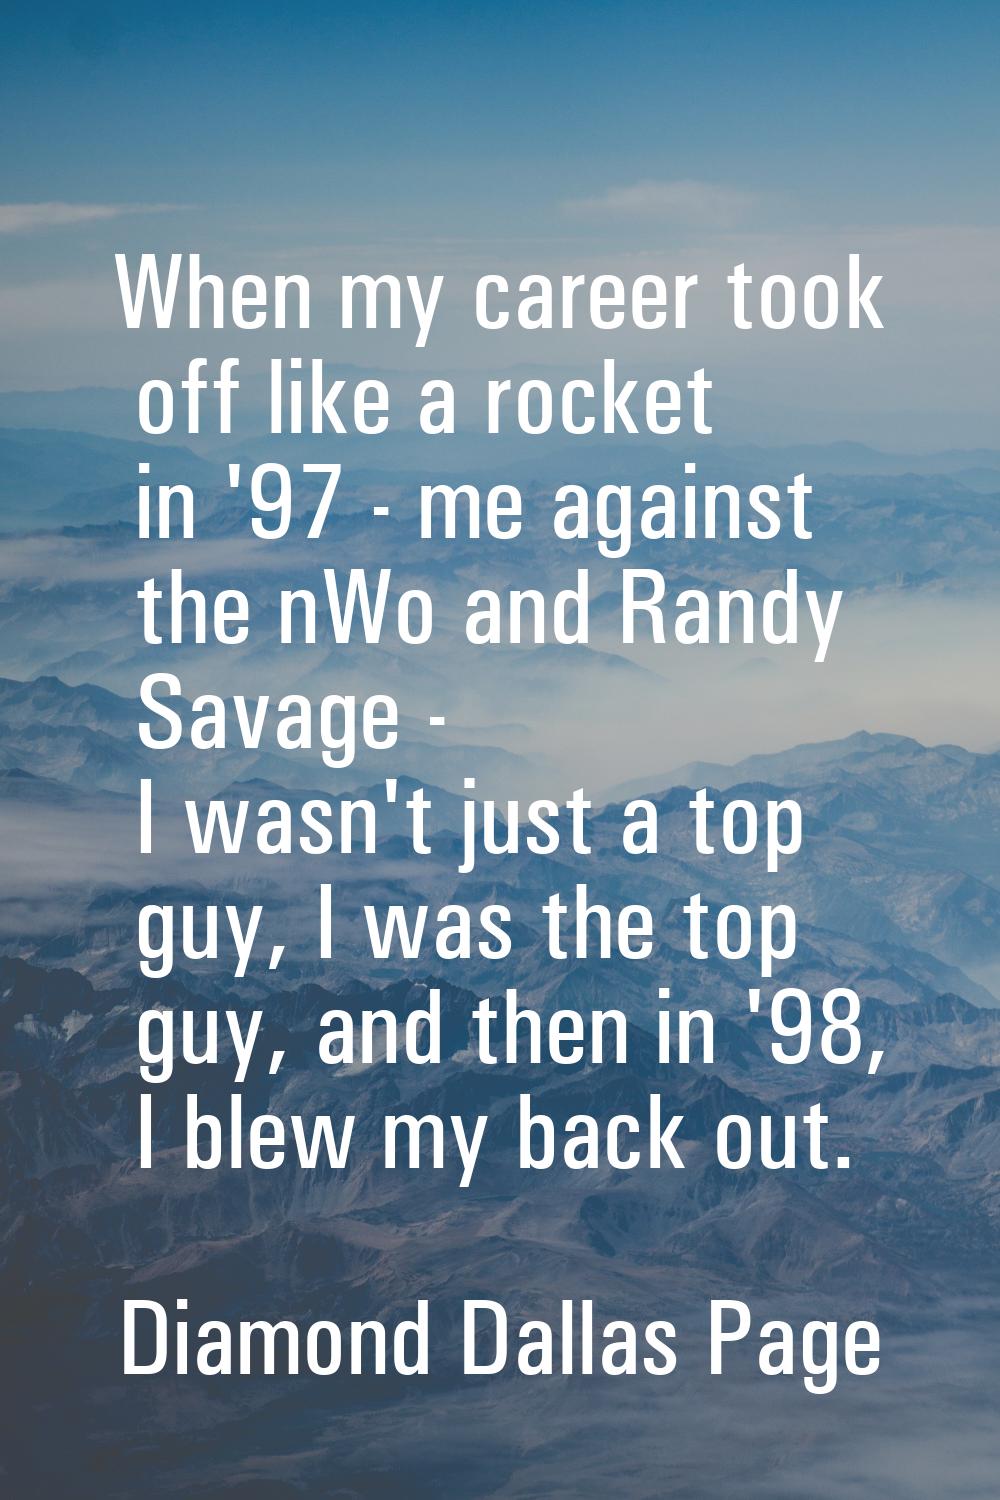 When my career took off like a rocket in '97 - me against the nWo and Randy Savage - I wasn't just 